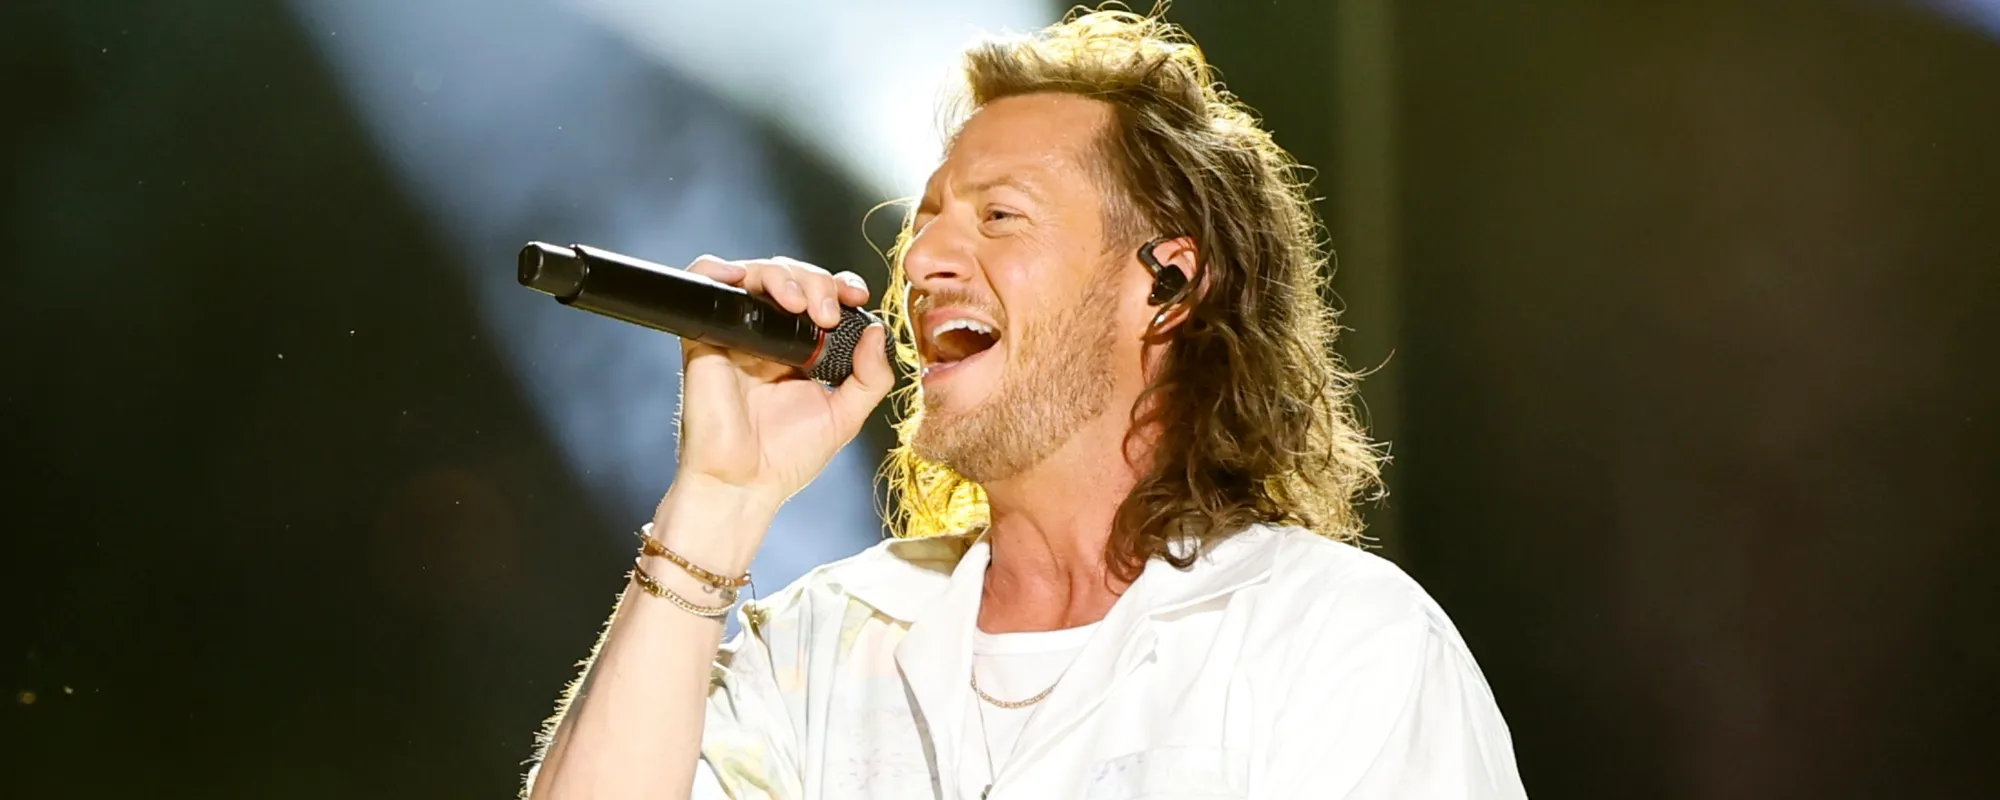 Tyler Hubbard Respects Beyoncé for Her Jump to Country Music, Calls it “An Honor”